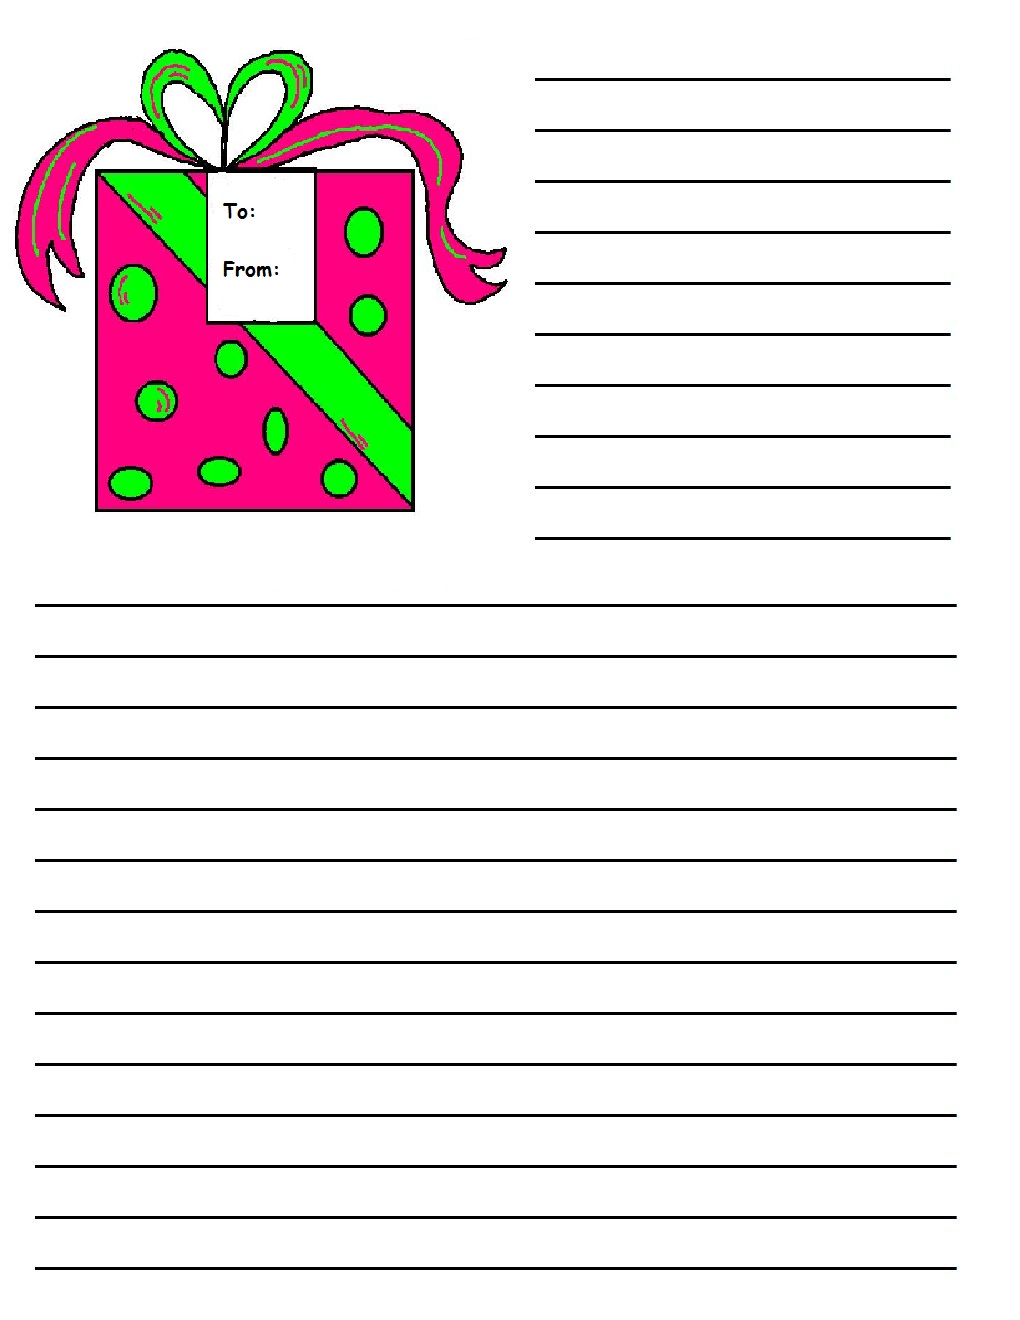 Printable Holiday Stationery and Writing Paper